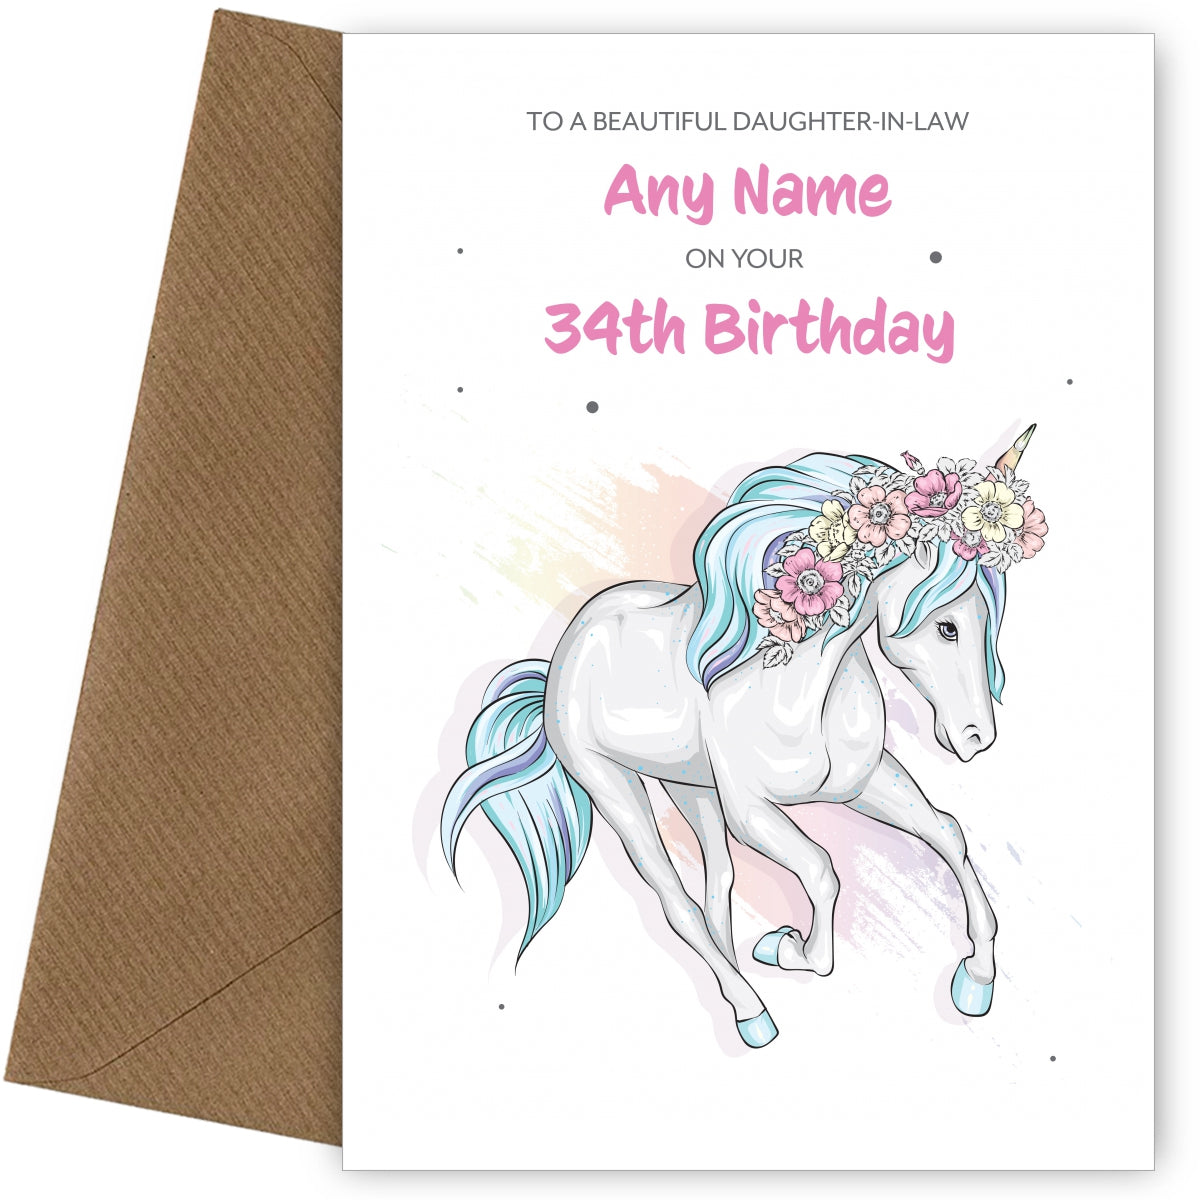 34th Birthday Card for Daughter-in-law - Beautiful Unicorn